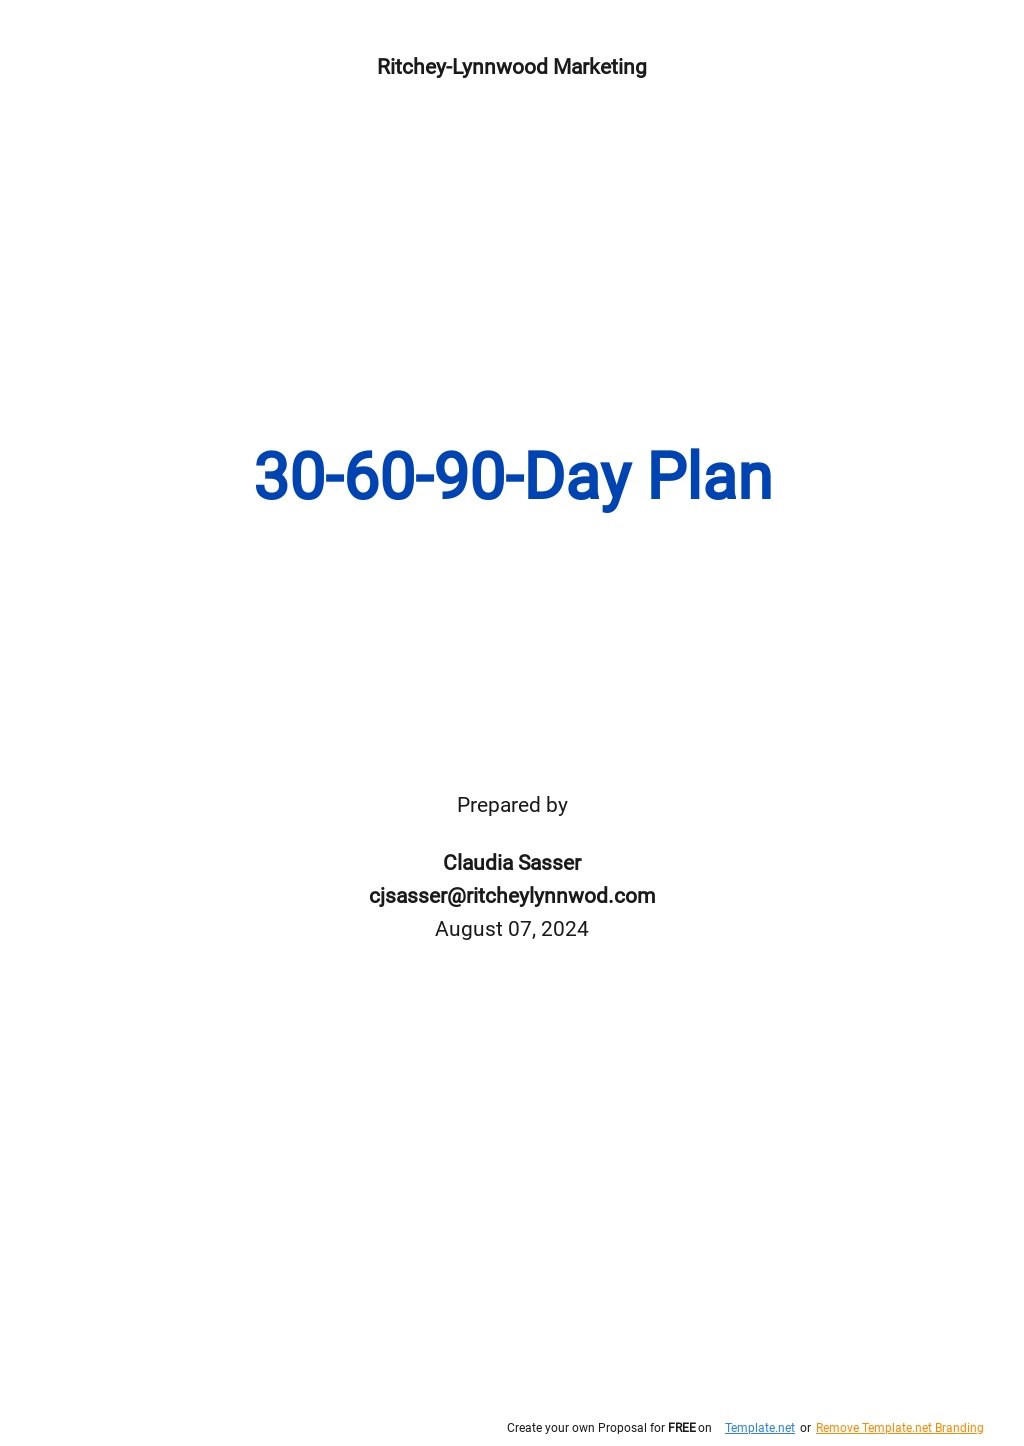 Free 21 21 21 Day Plan Templates, 21+ Download in Word, Pages Within 30 60 90 Day Plan Template Word